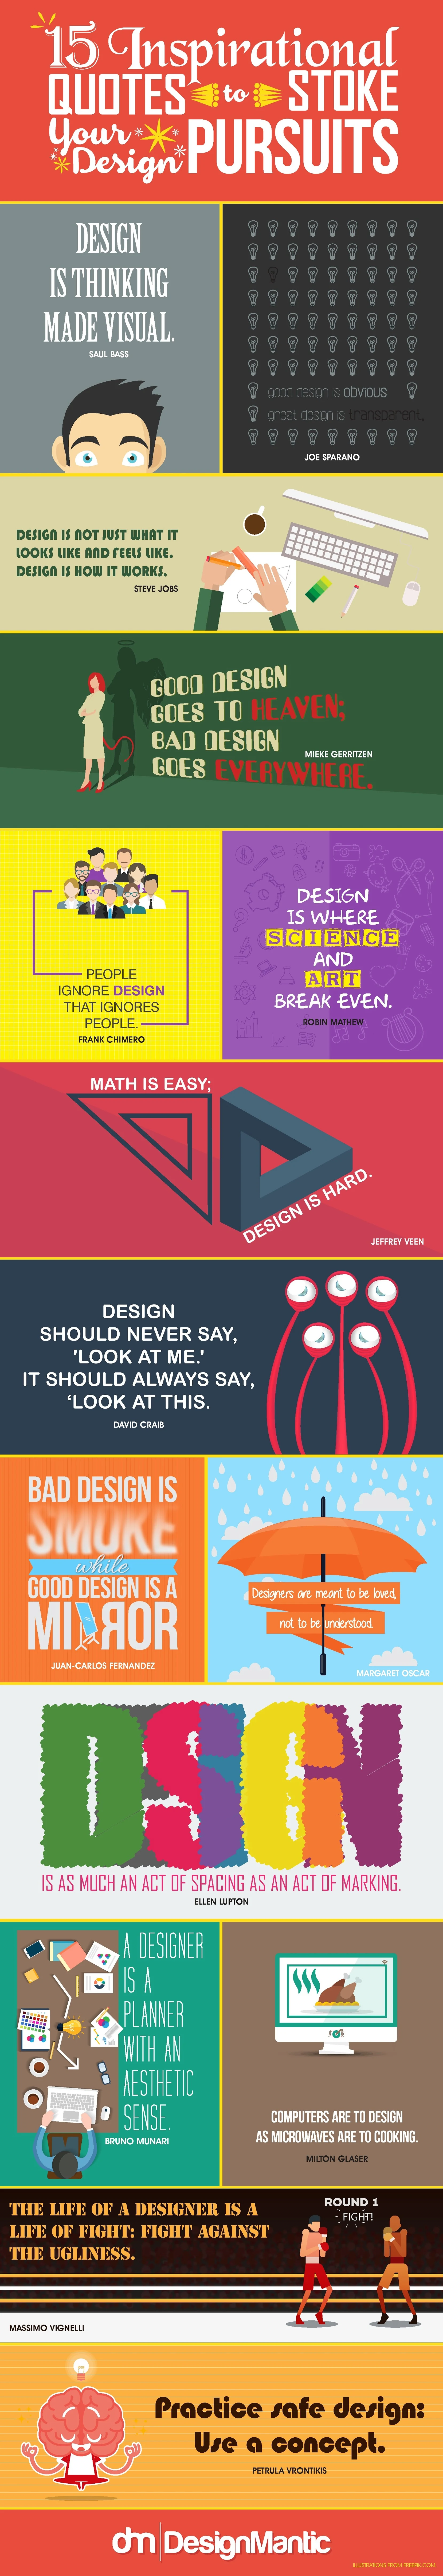 15 Inspirational Quotes To Stoke Your Design Pursuits - #infographic